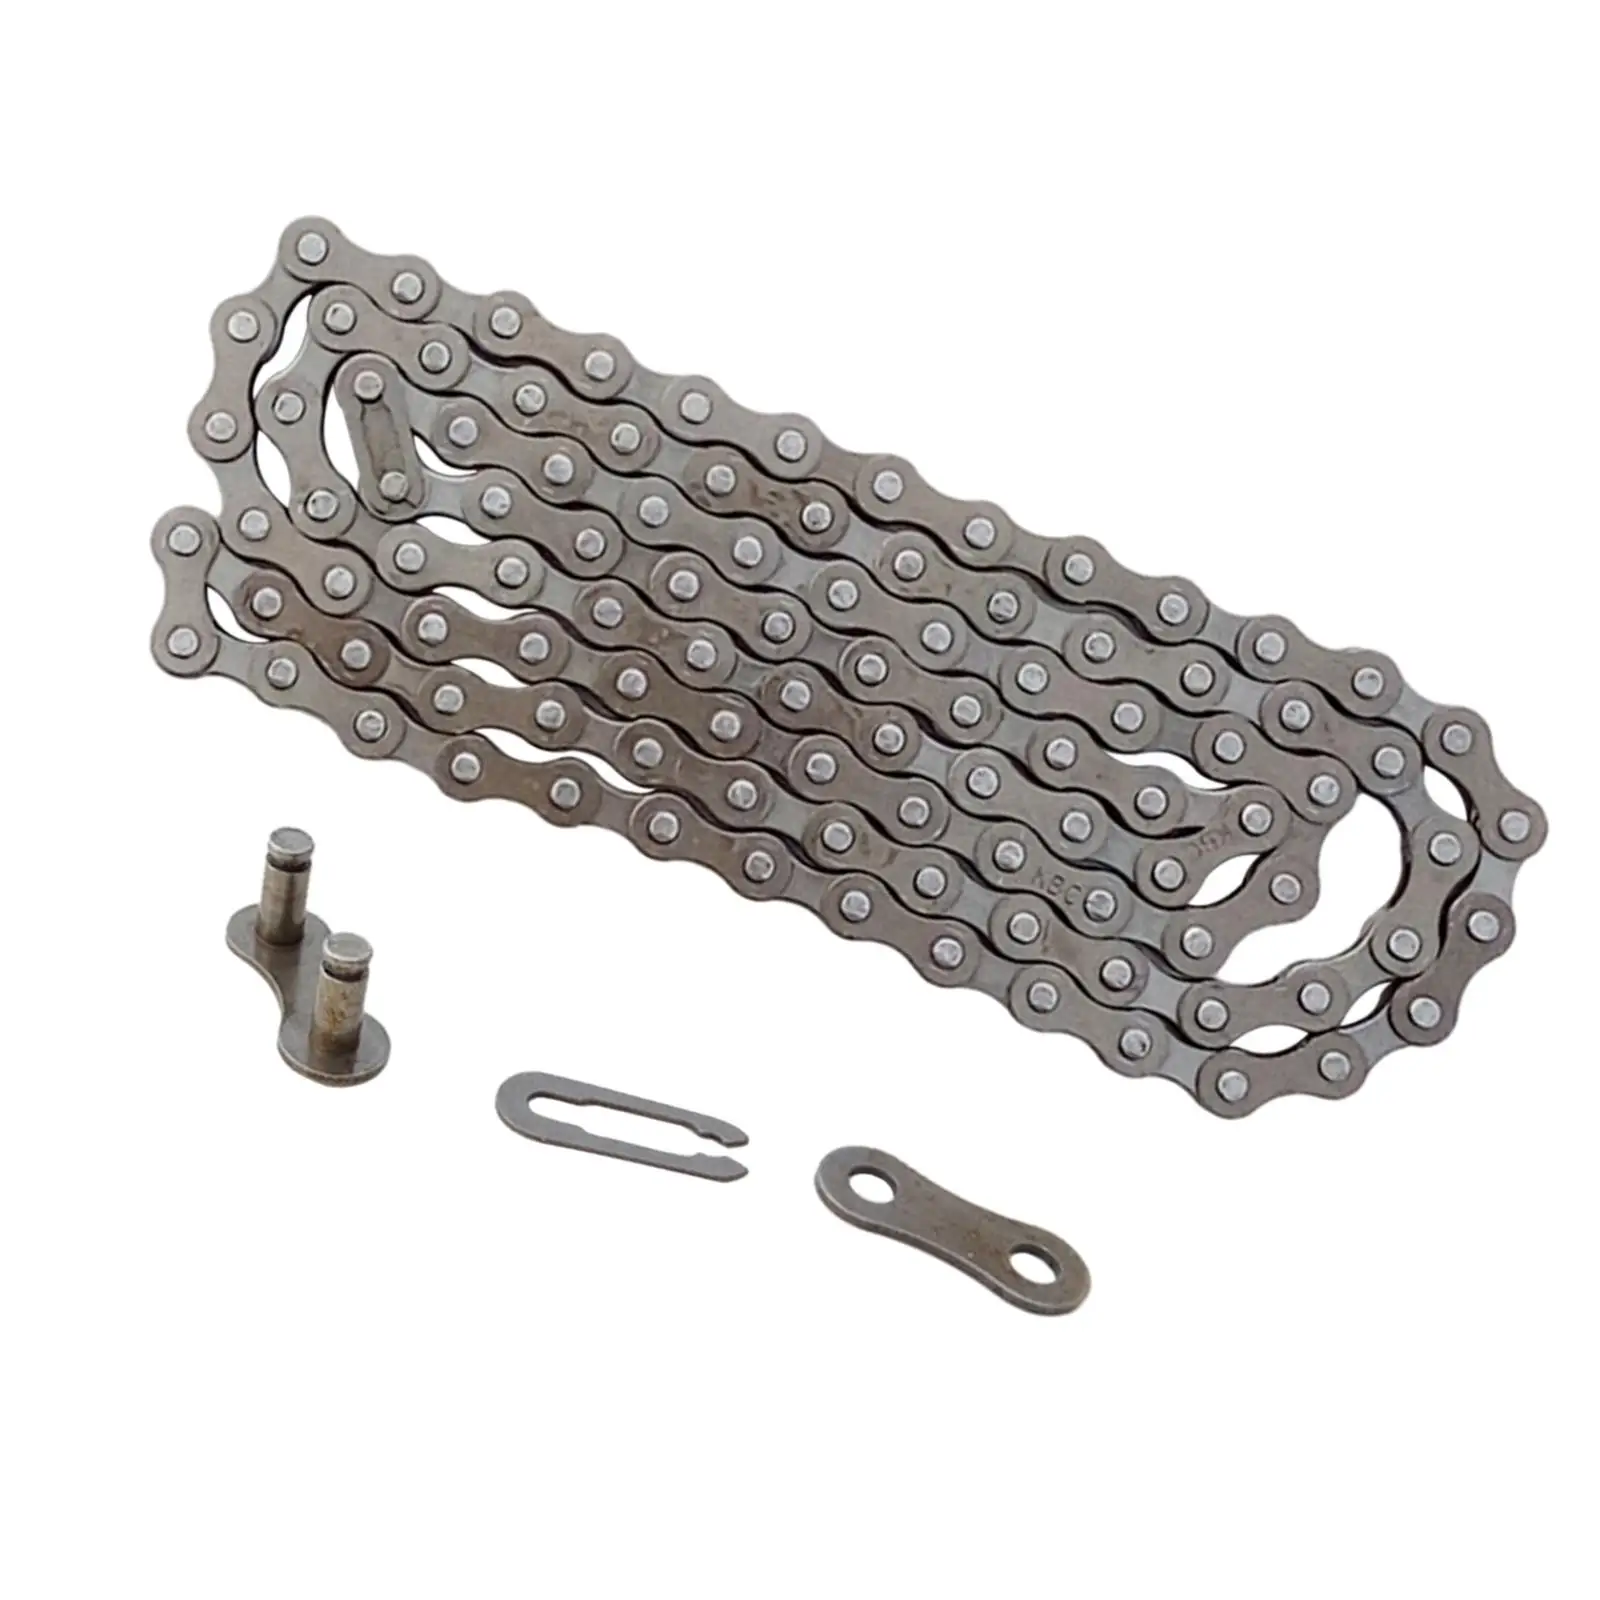 114 Pieces Bicycle Missing Link Chain Joint Connector Bike Chain Master Links for 6-7-8 9 10 11 Part Road MTB